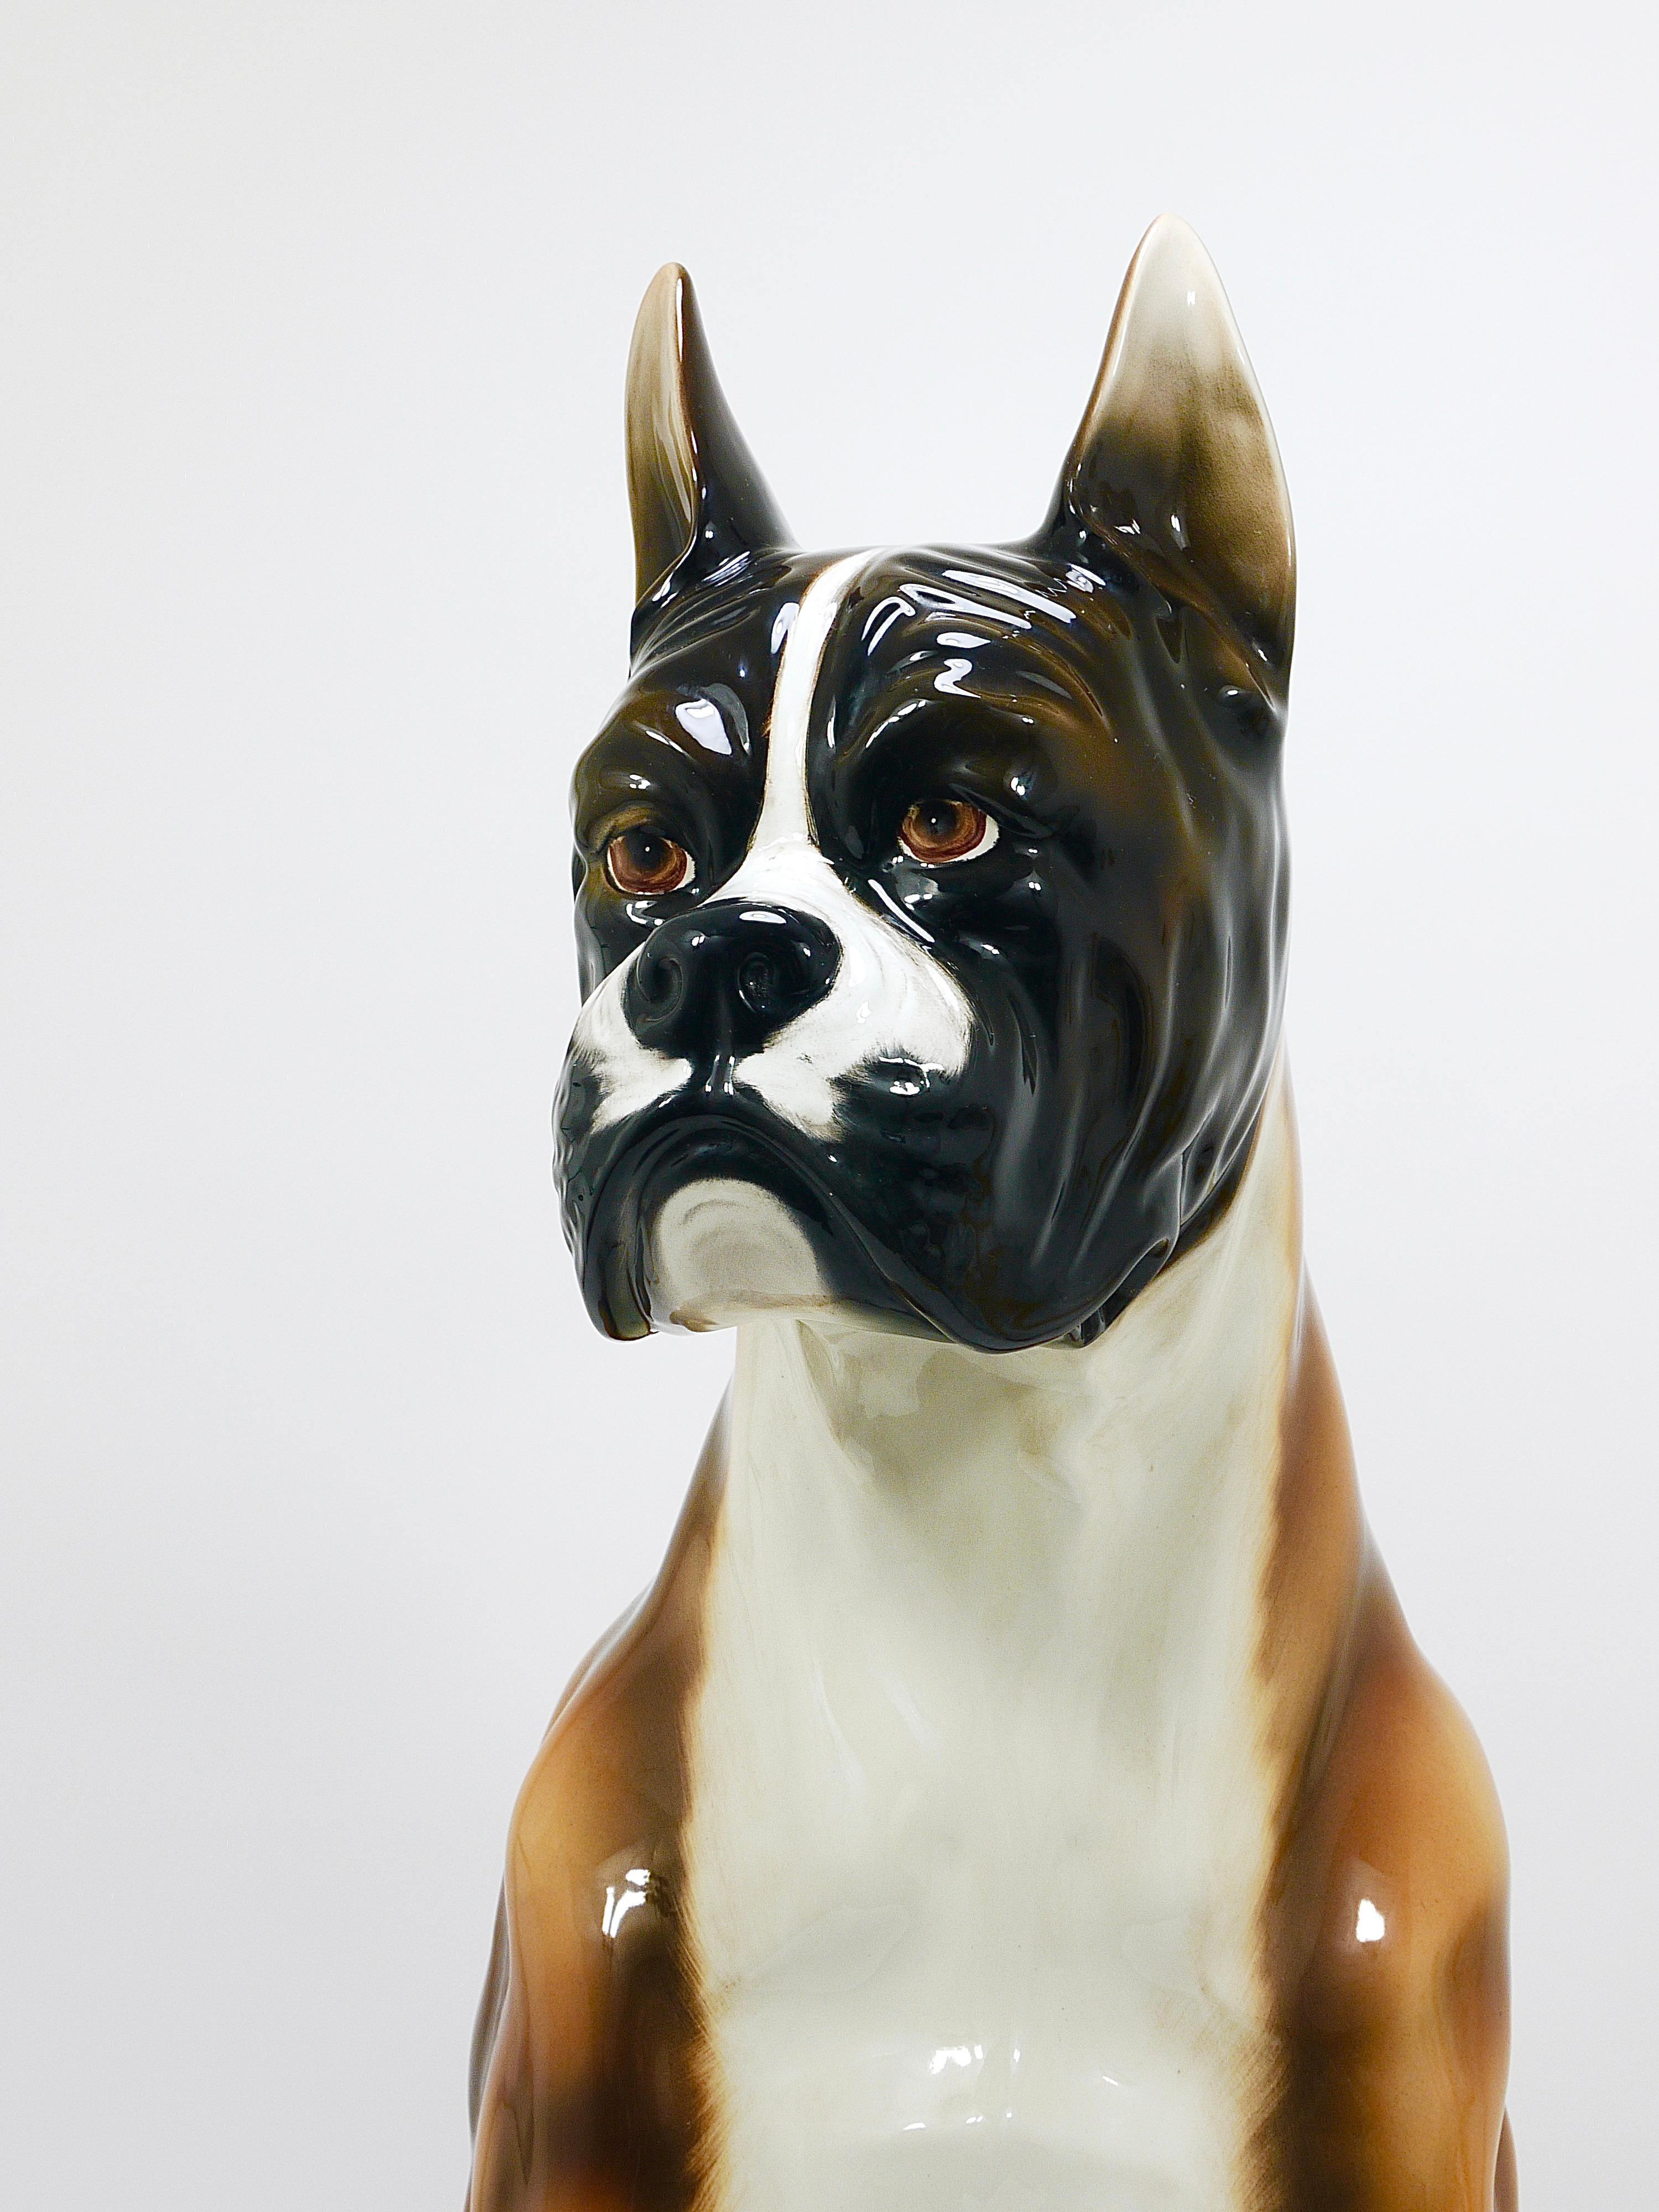 Boxer Dog Life-Size Majolica Statue Sculpture, Glazed Ceramic, Italy, 1970s In Good Condition For Sale In Vienna, AT